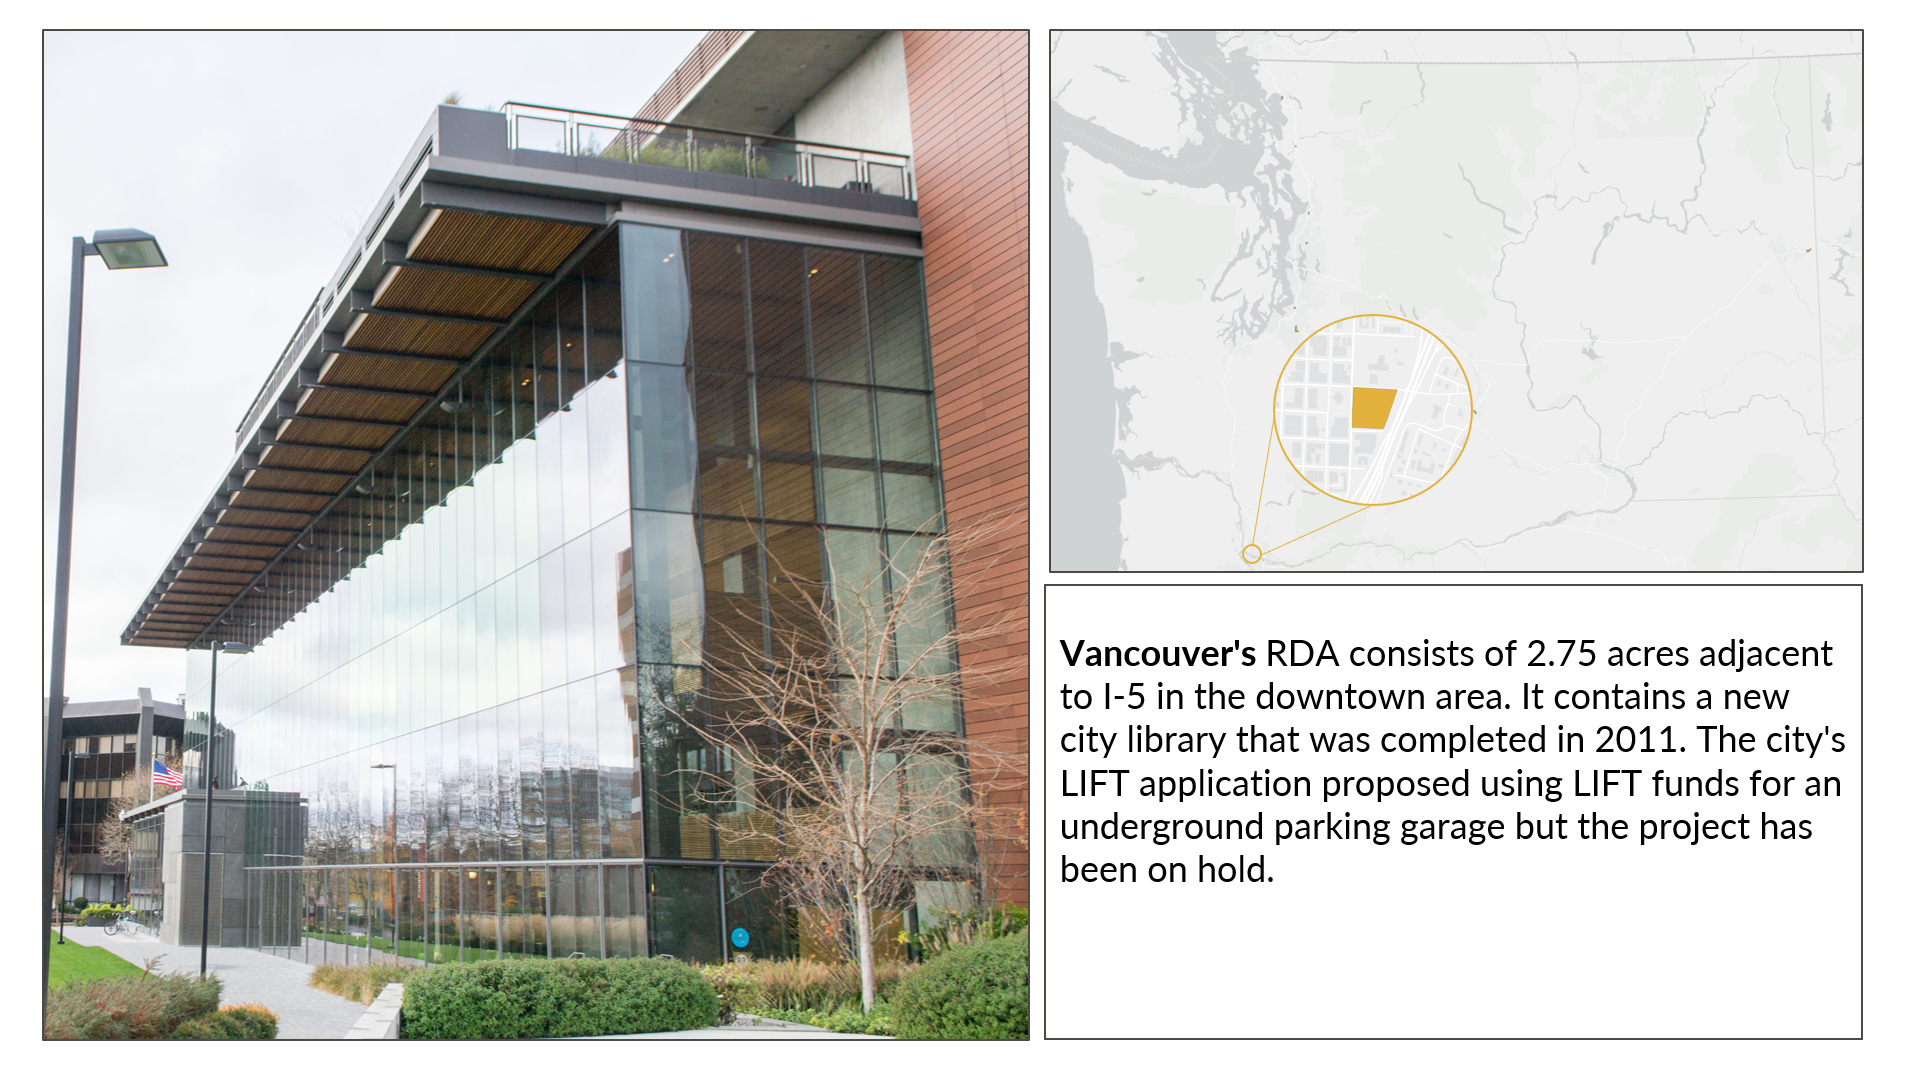 Grpahic showing map of RDA in Washington, a photo in that RDA, and the following text: Vancouver's RDA consists of 2.75 acres adjacent to I-5 in the downtown area. It contains a new city library that was completed in 2011. The city's LIFT application proposed using LIFT funds for an underground parking garage but the project has been on hold. 
                  